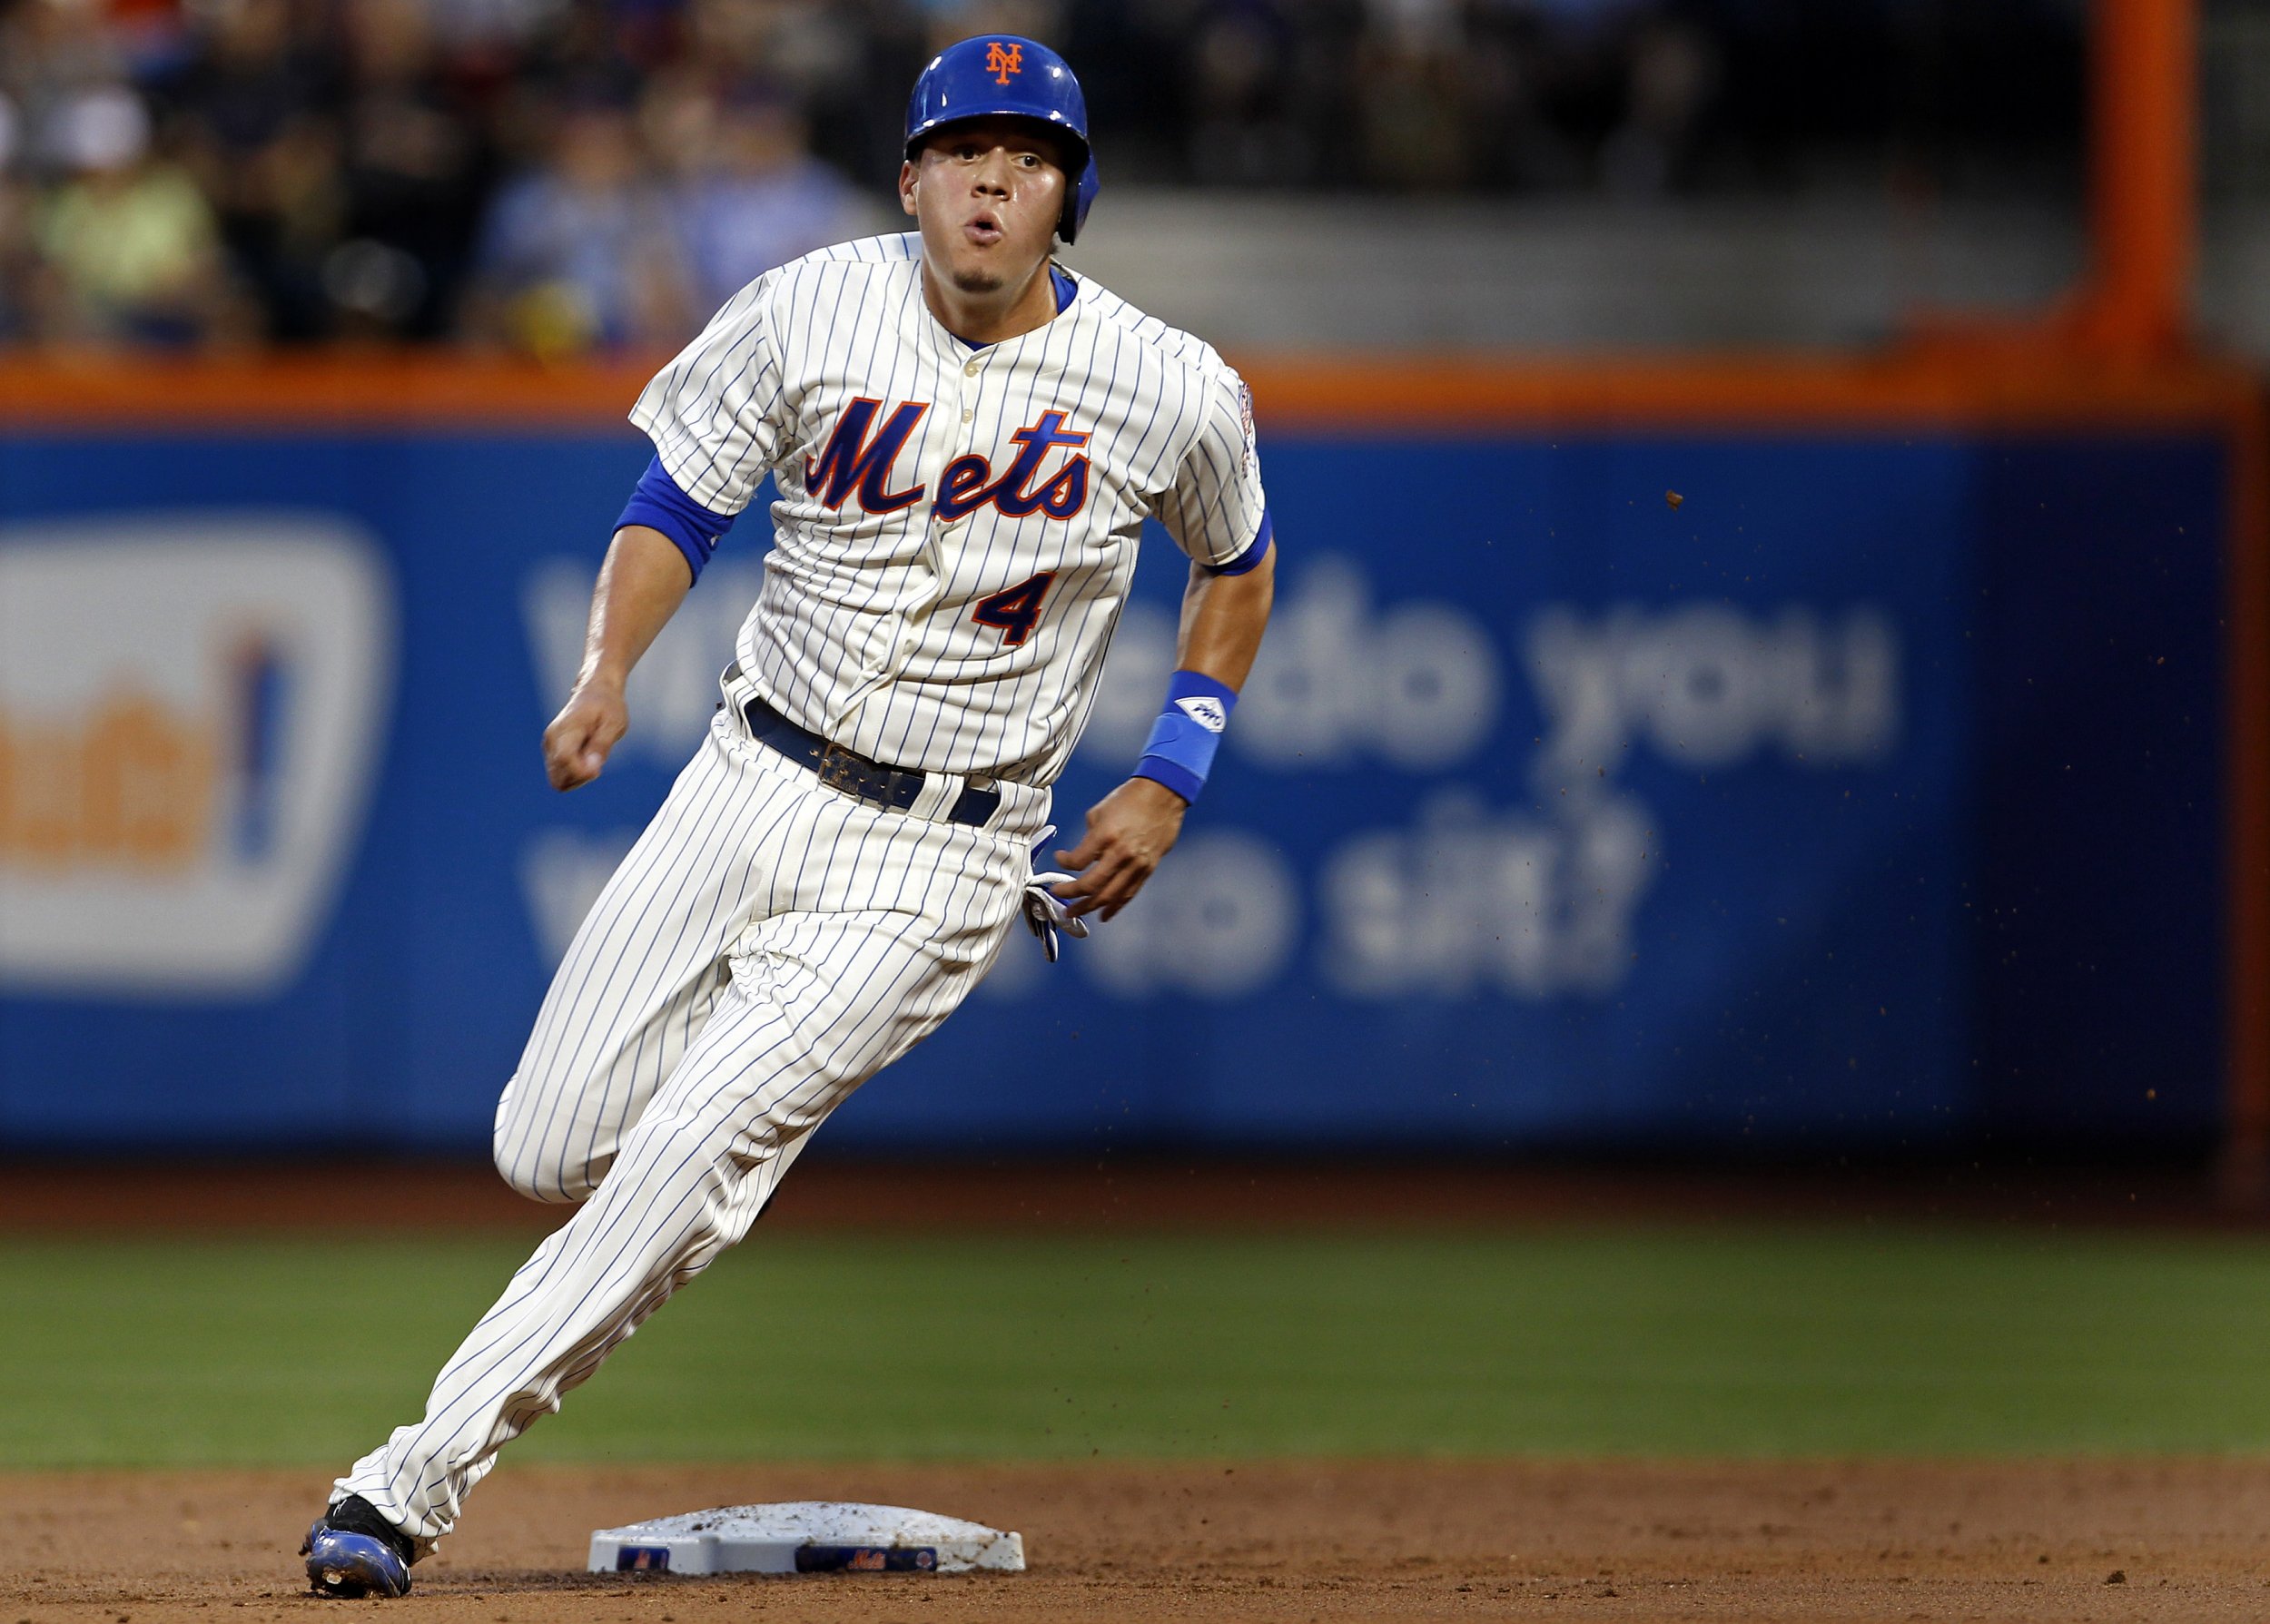 New York Mets' Wilmer Flores debuts Friends-themed at-bat music